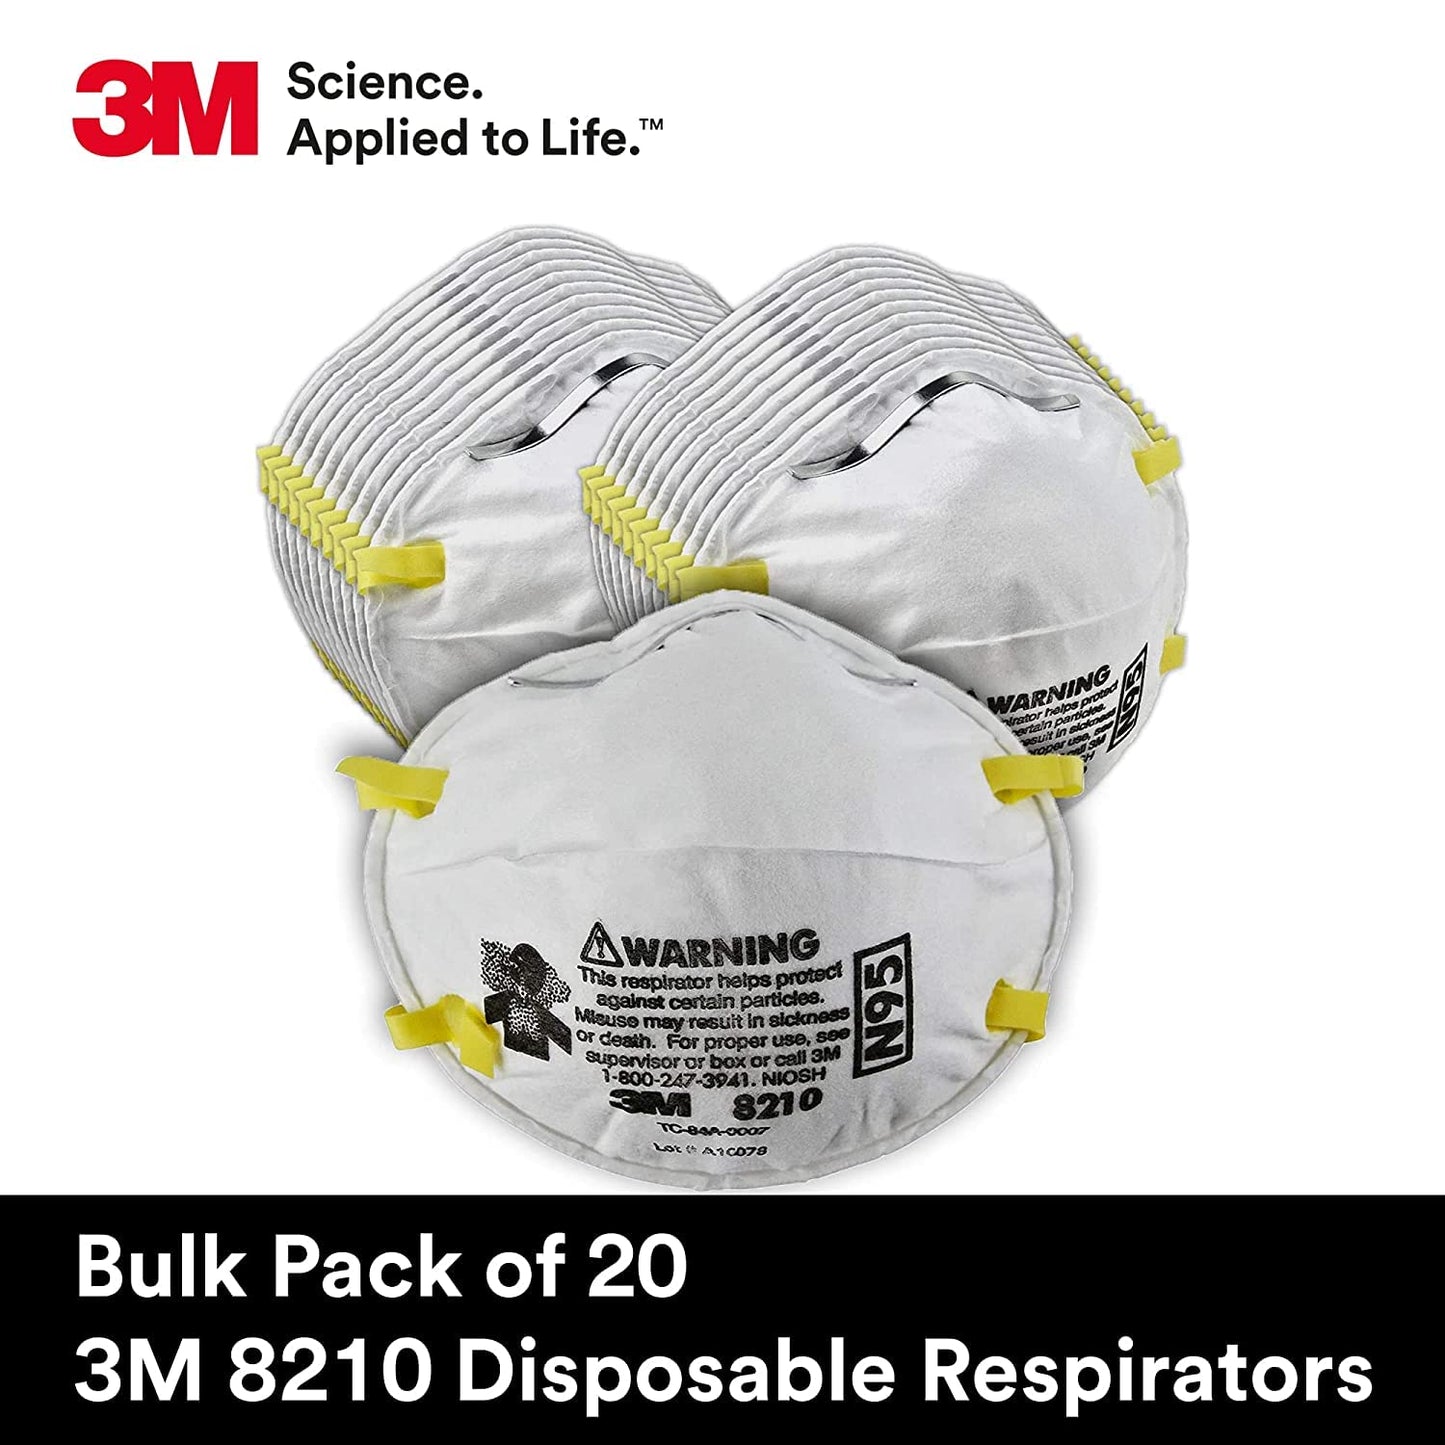 3M Personal Protective Equipment Particulate Respirator 8210, N95, Smoke, Dust, Grinding, Sanding, Sawing, Sweeping, 20 Count (Pack of 1)